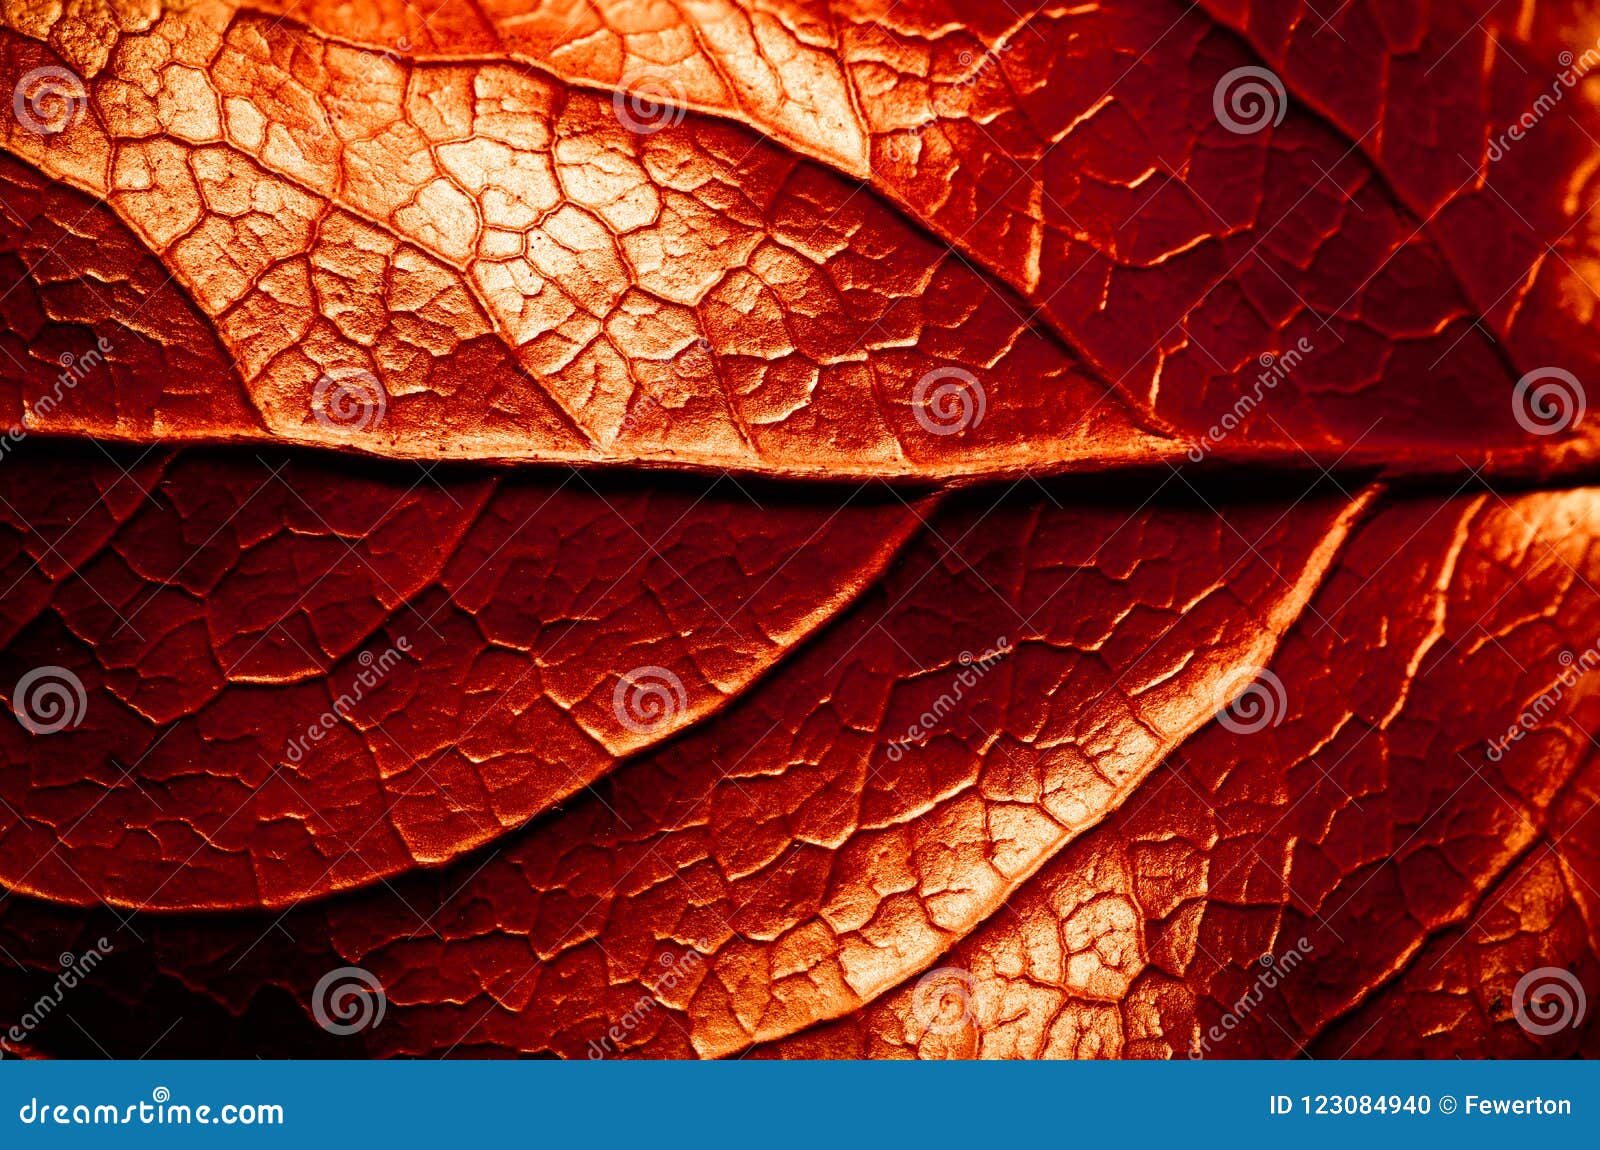 red and sepia toned dry leaf rugged surface structure extreme macro closeup photo with midrib parallel to the frame